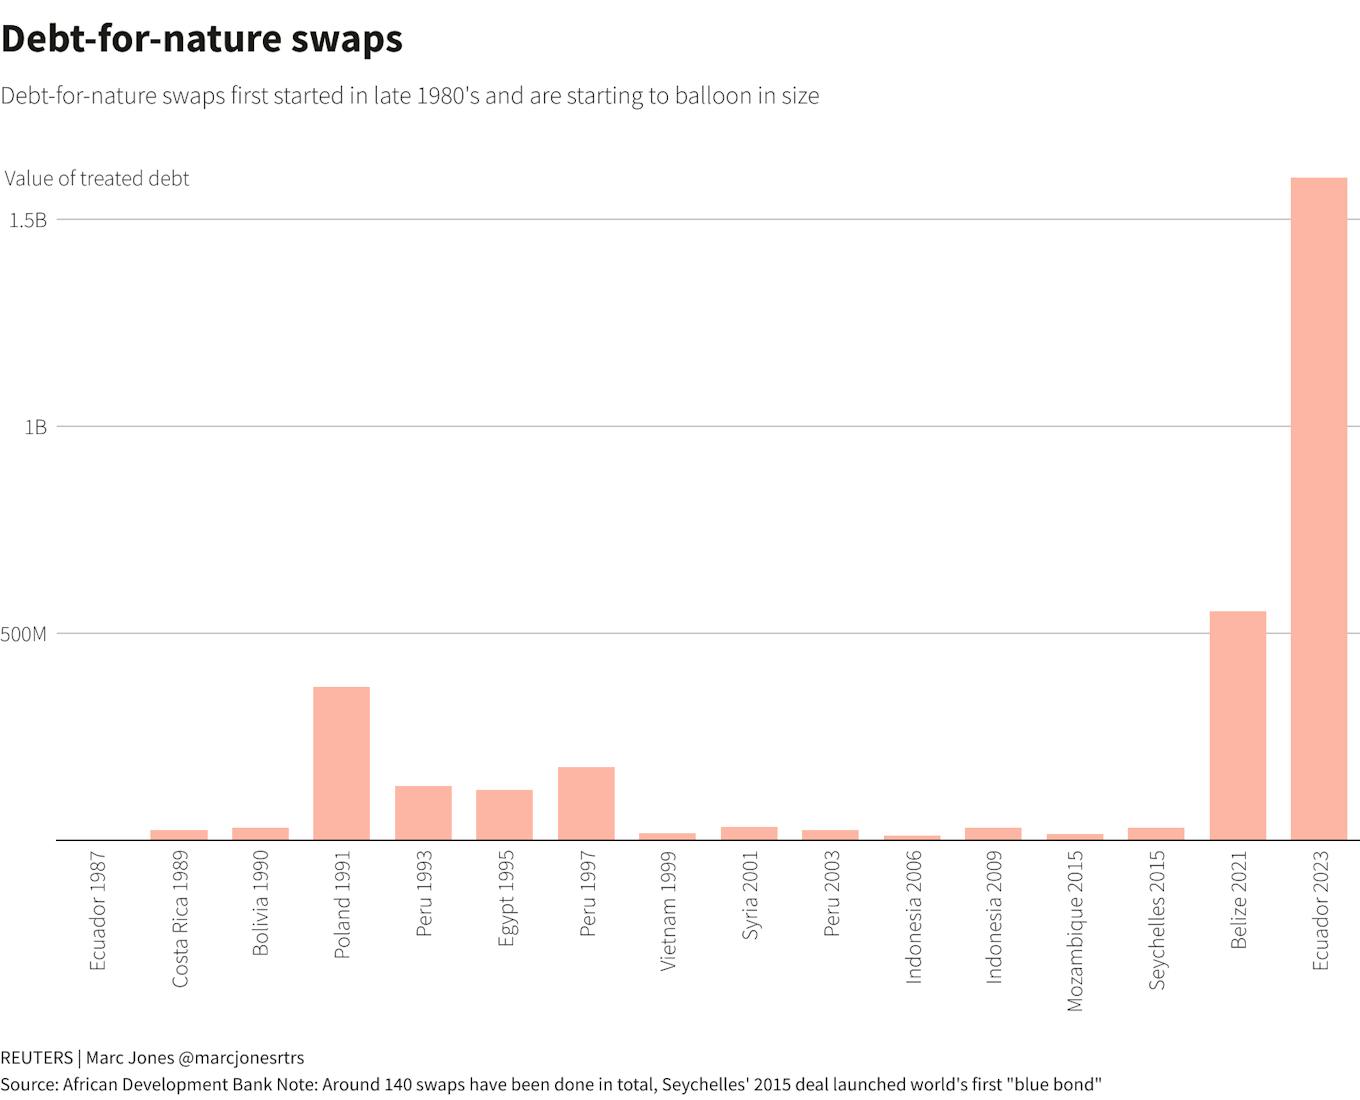 Debt-for-nature swaps over the past 35 years